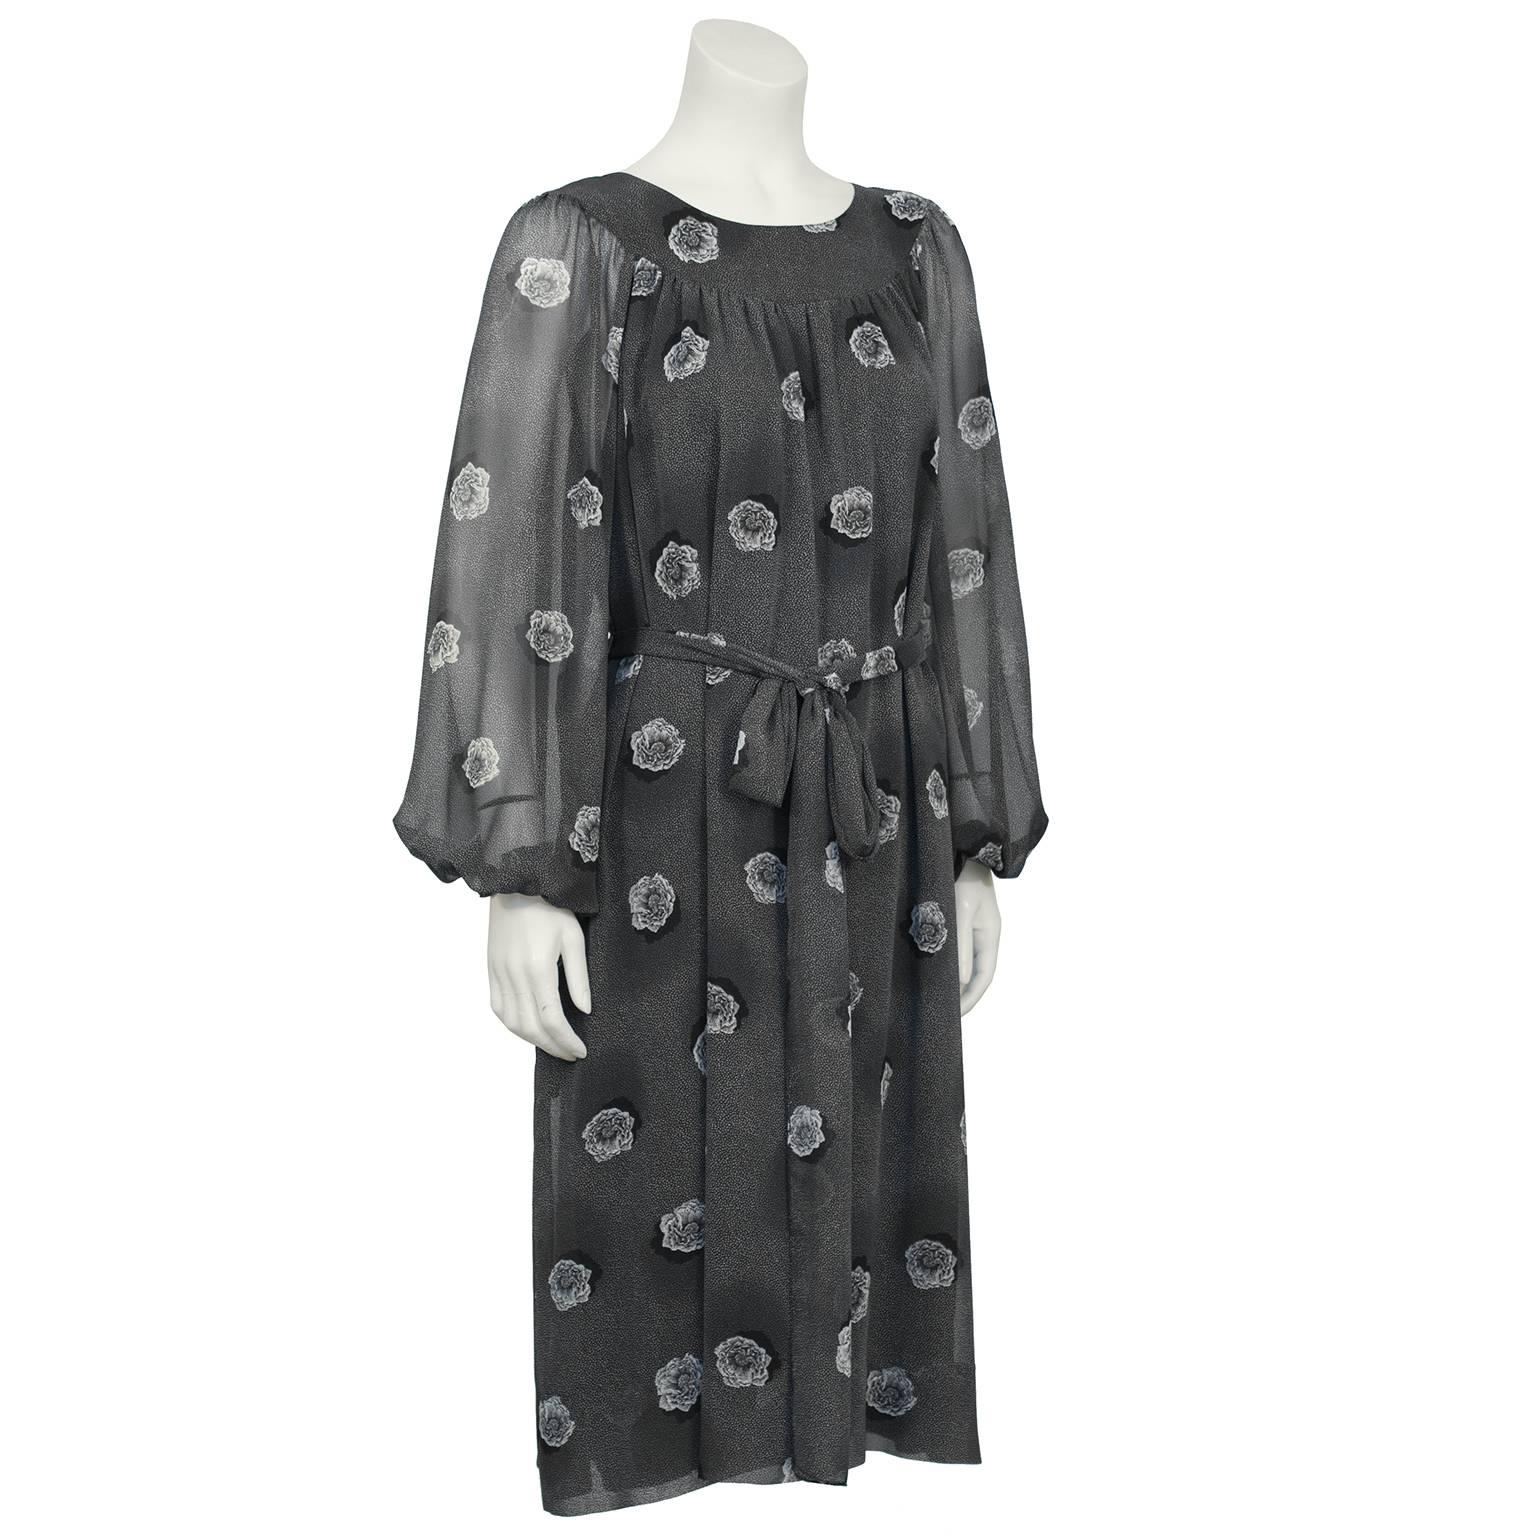 Loose fitting Hanae Mori gray printed chiffon dress from the 1970's. Yoke style neckline with see through chiffon Bishop style sleeves with elasticized cuffs. Dress features an allover gray speckled print with larger white and gray flowers. Dress is